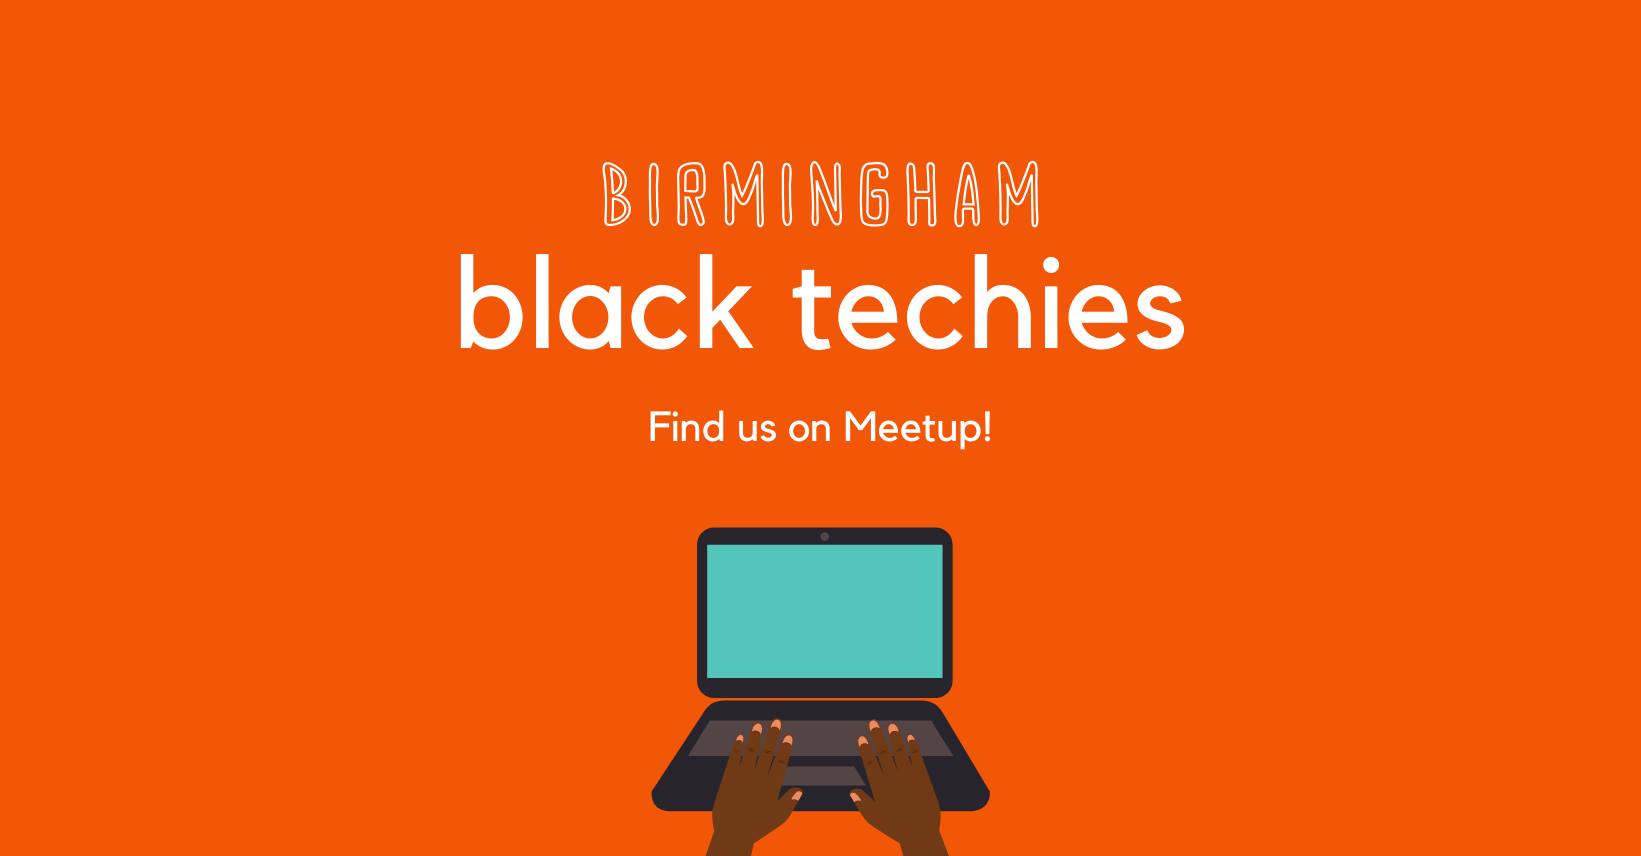 Birmingham Black Techies is a supportive community for Black technologists & aspiring techies